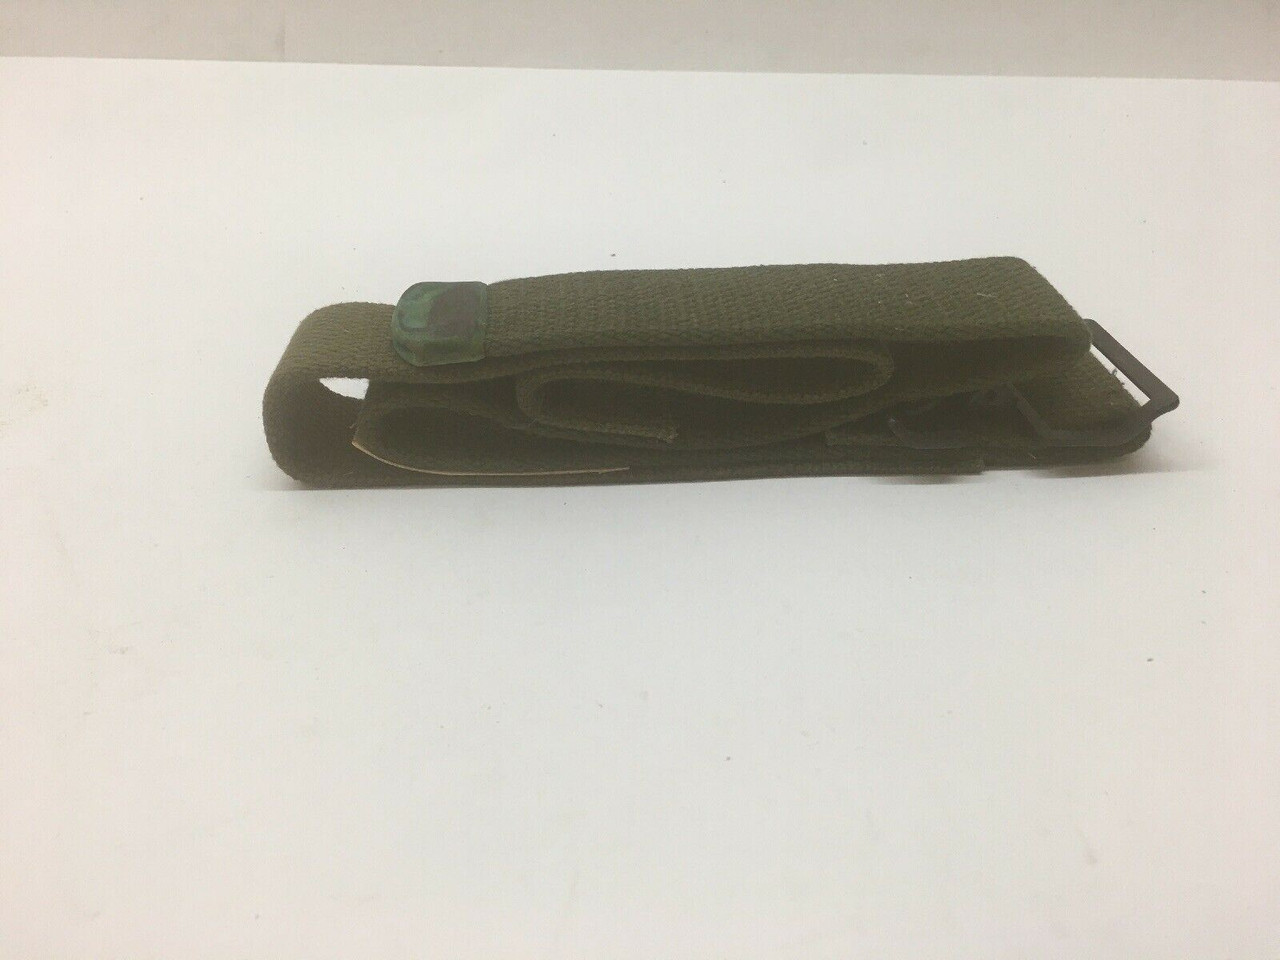 Webbing Strap Carrier Assembly 13227E5825 Cecom Olive Drab